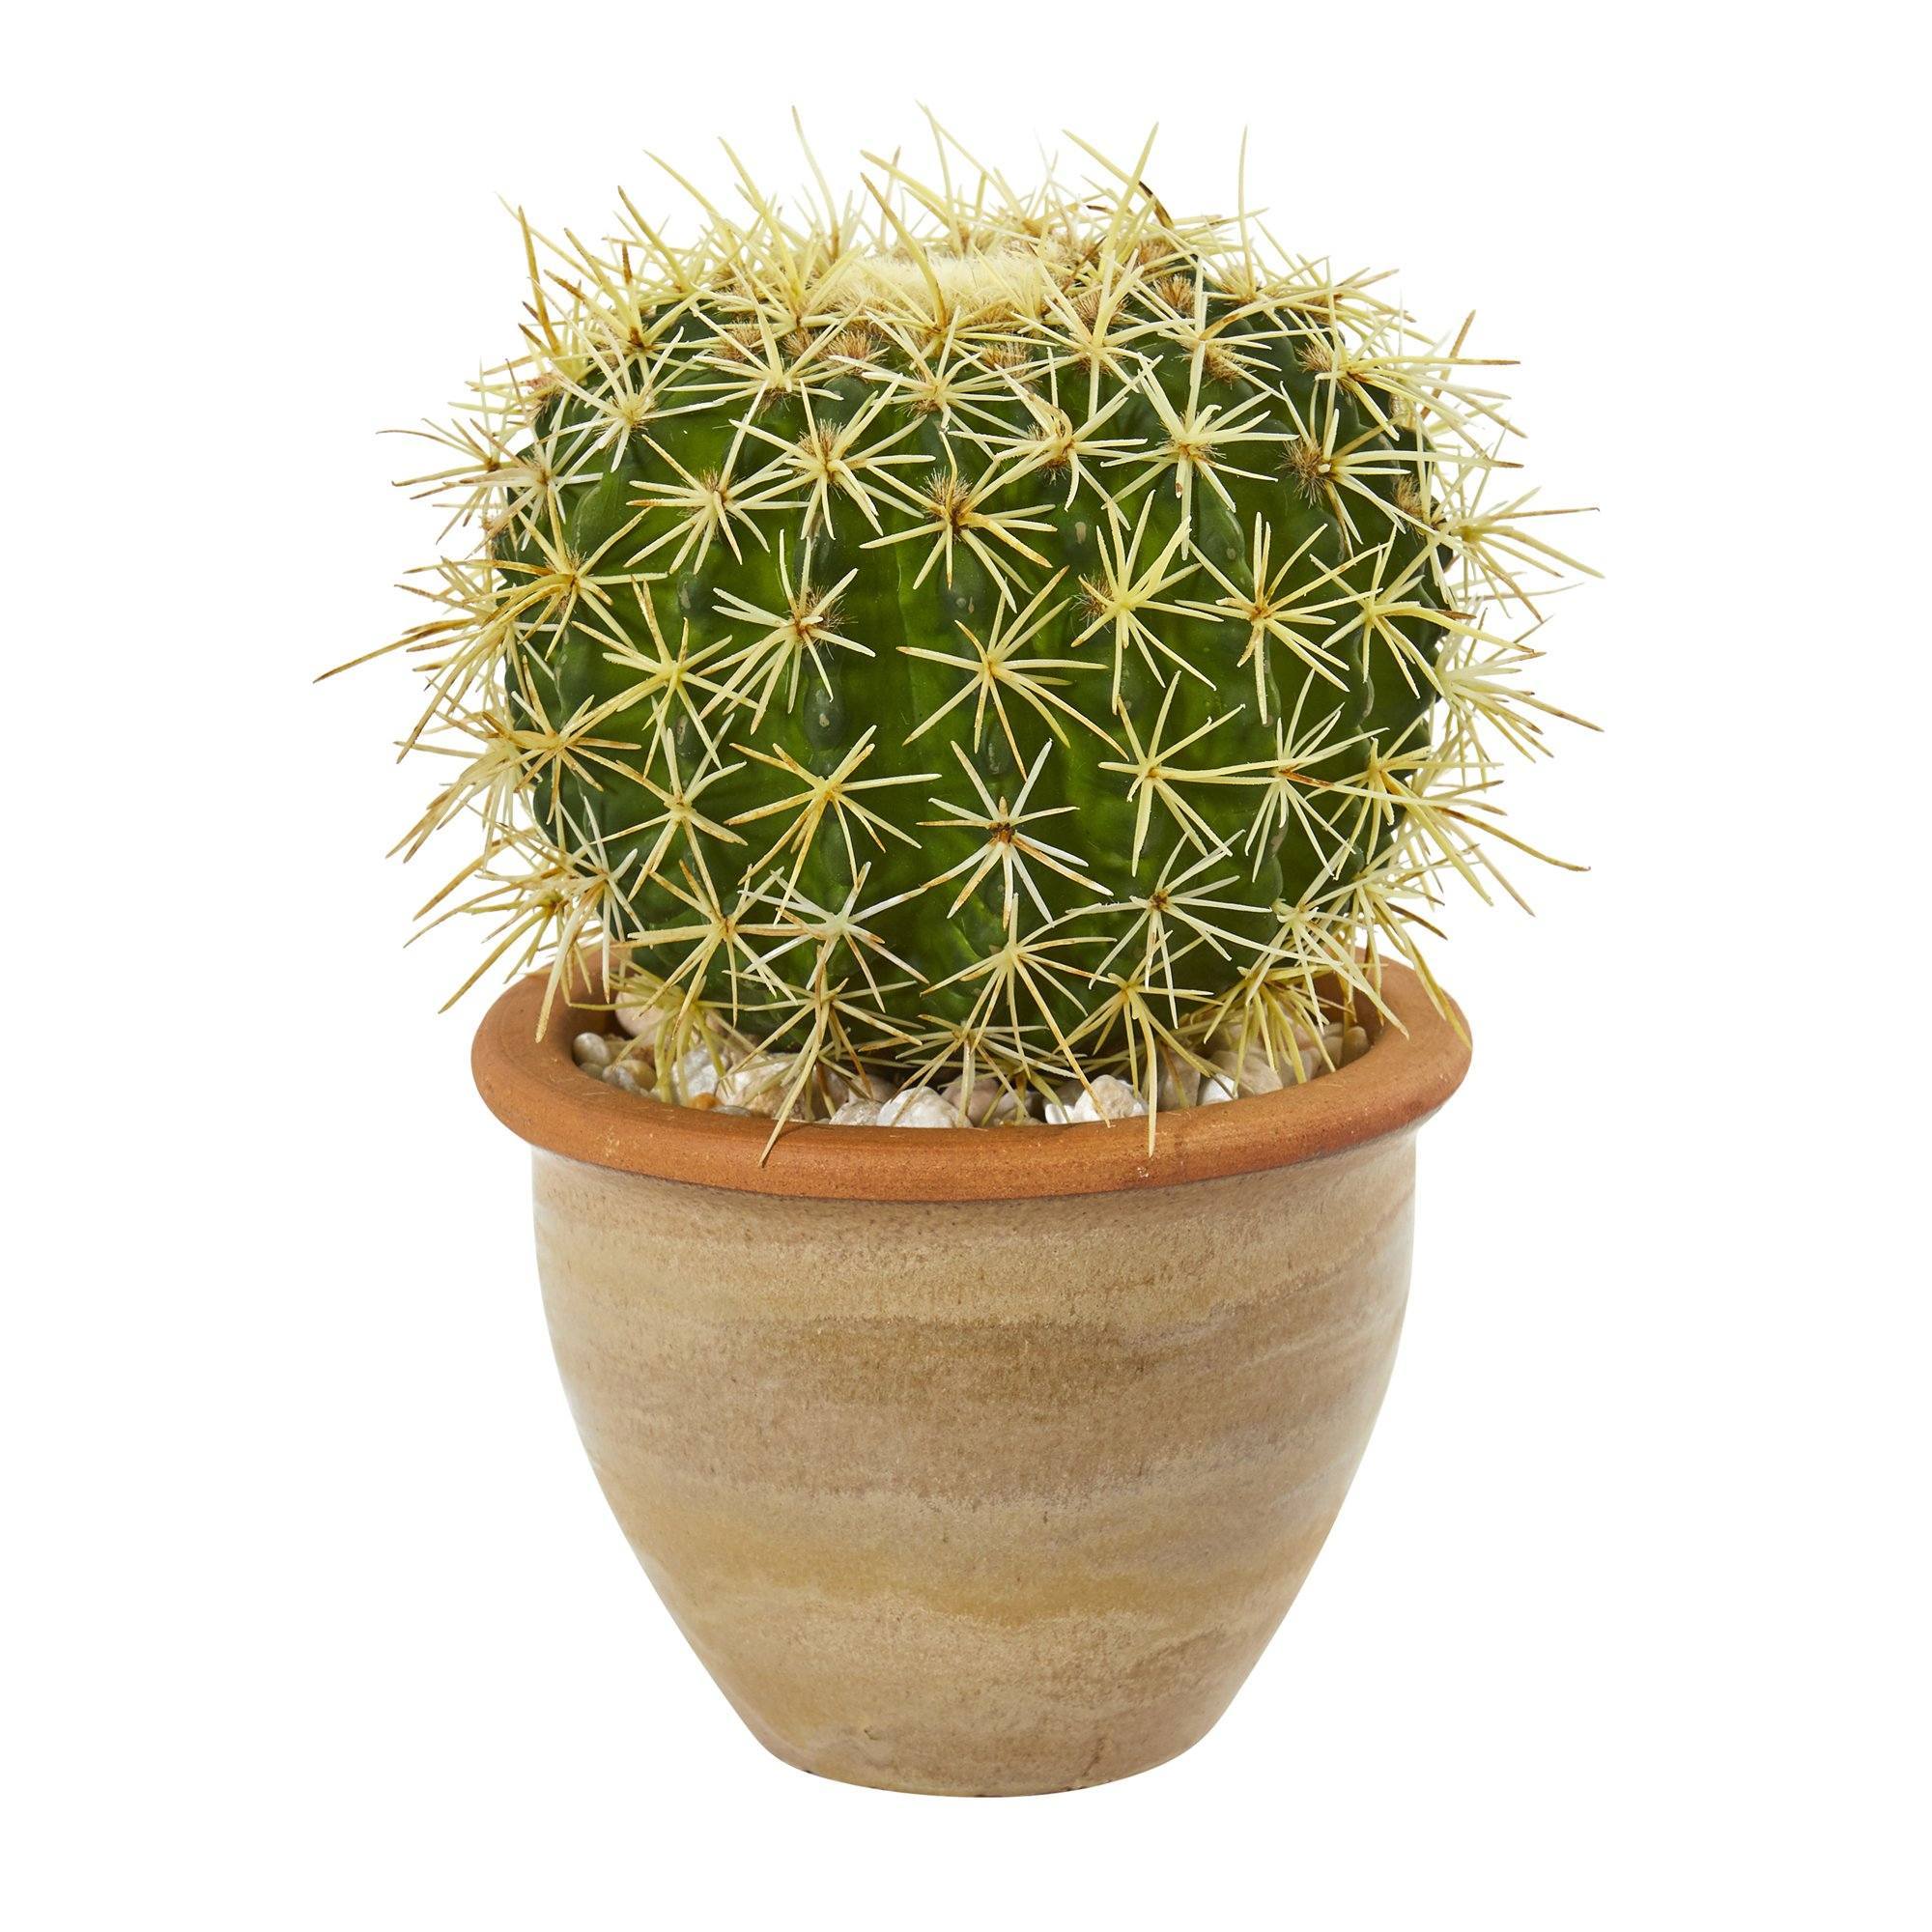 Artificial Arrangement - 10” Cactus in Decorative Ceramic Planter by Nearly Natural